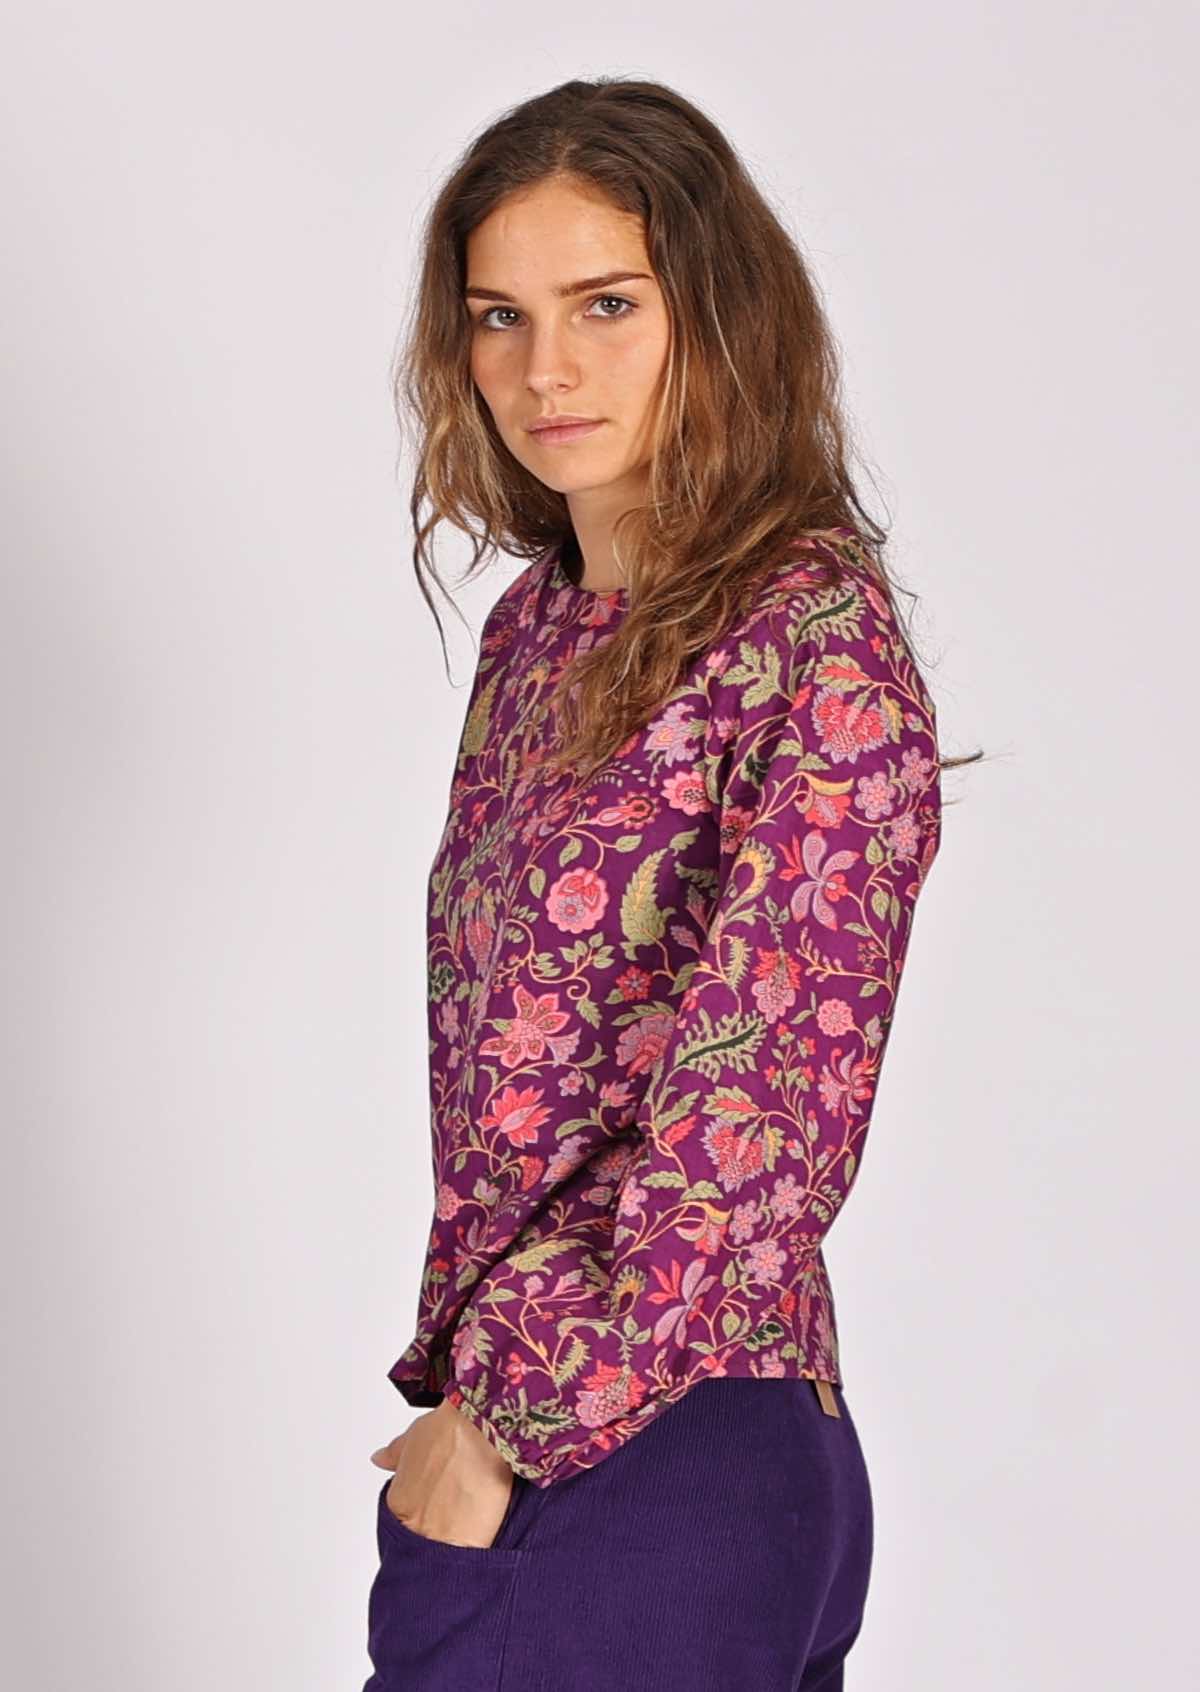 Long sleeve cotton top in sweet pink and purple floral print